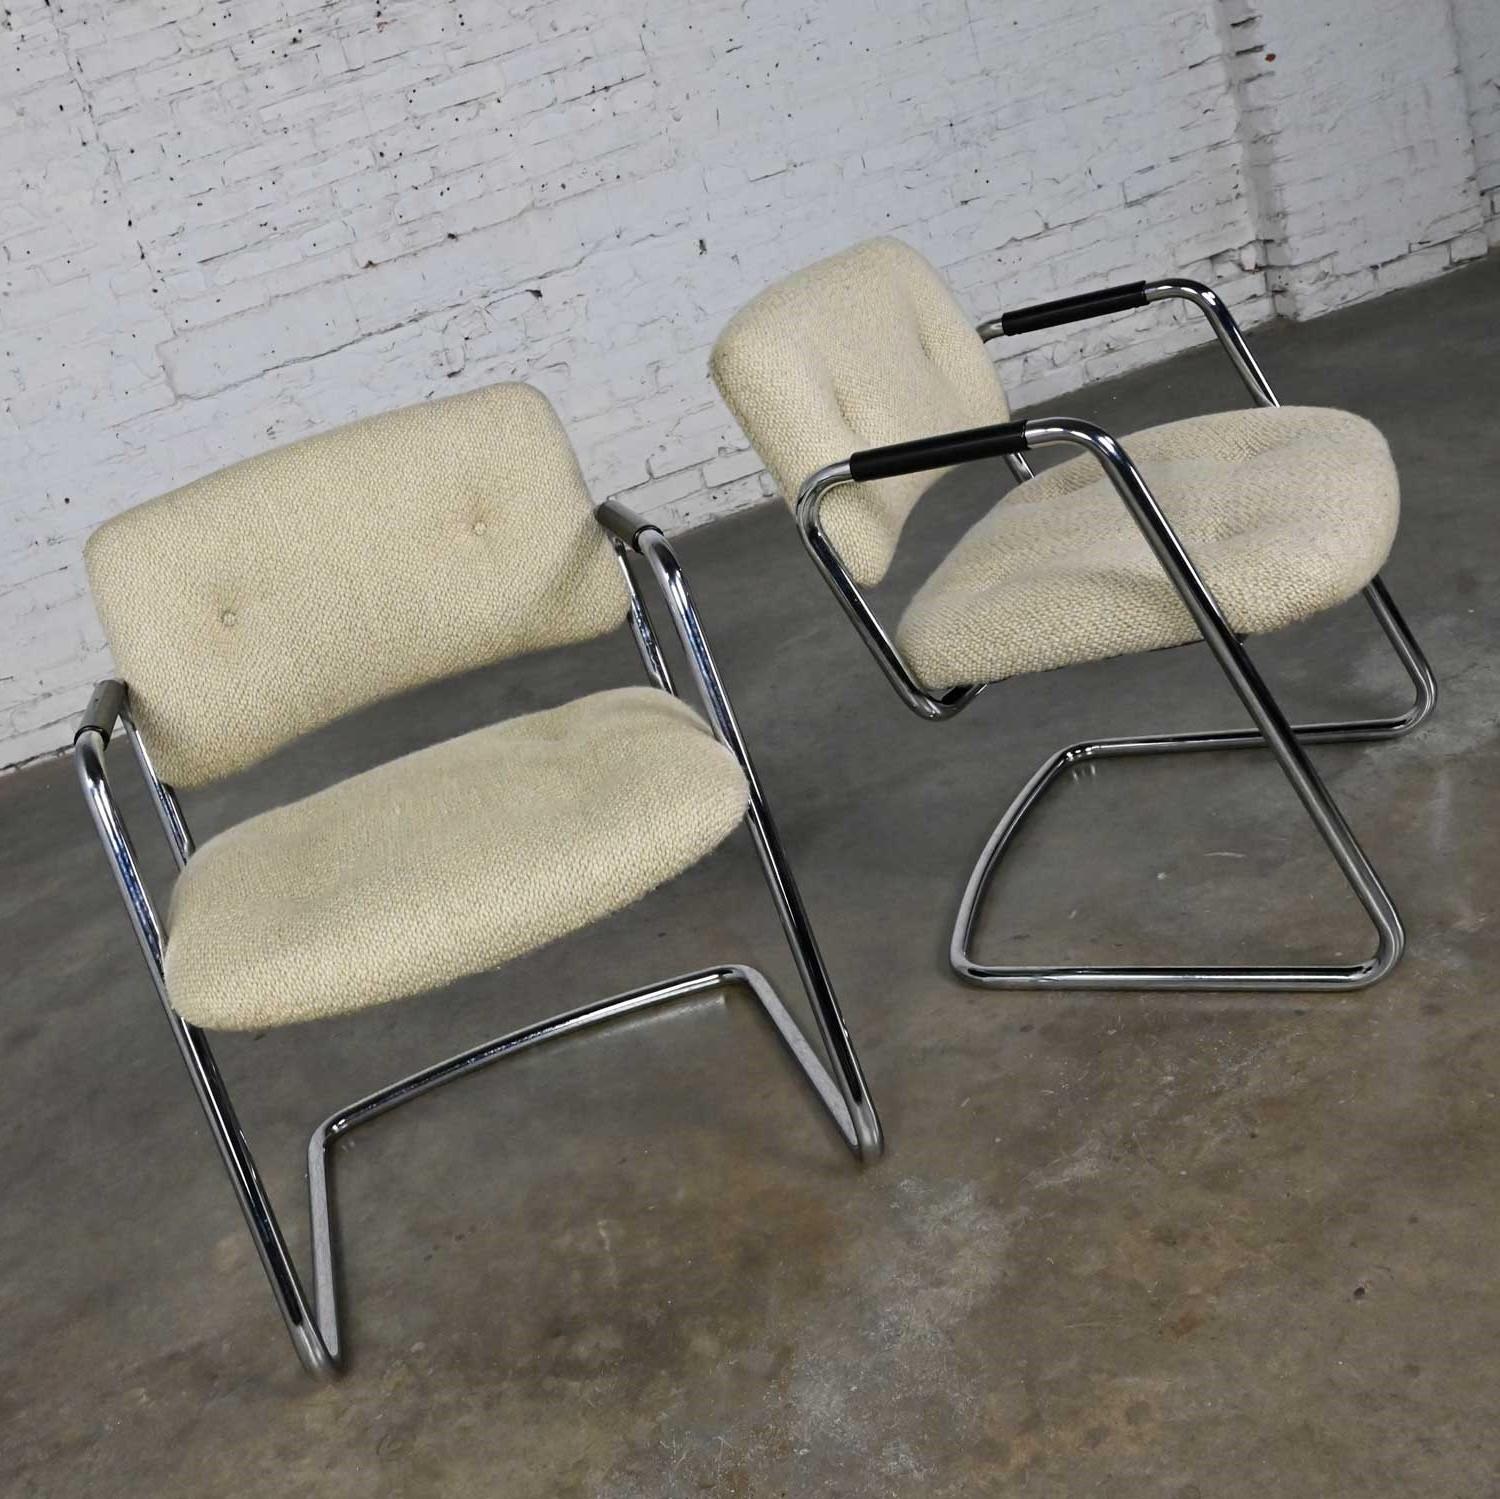 Fabulous vintage pair of modern chrome cantilever chairs with original oatmeal hopsacking and black plastic armrests by Steelcase labeled Model #421-482. Beautiful condition, keeping in mind that these are vintage and not new so will have signs of